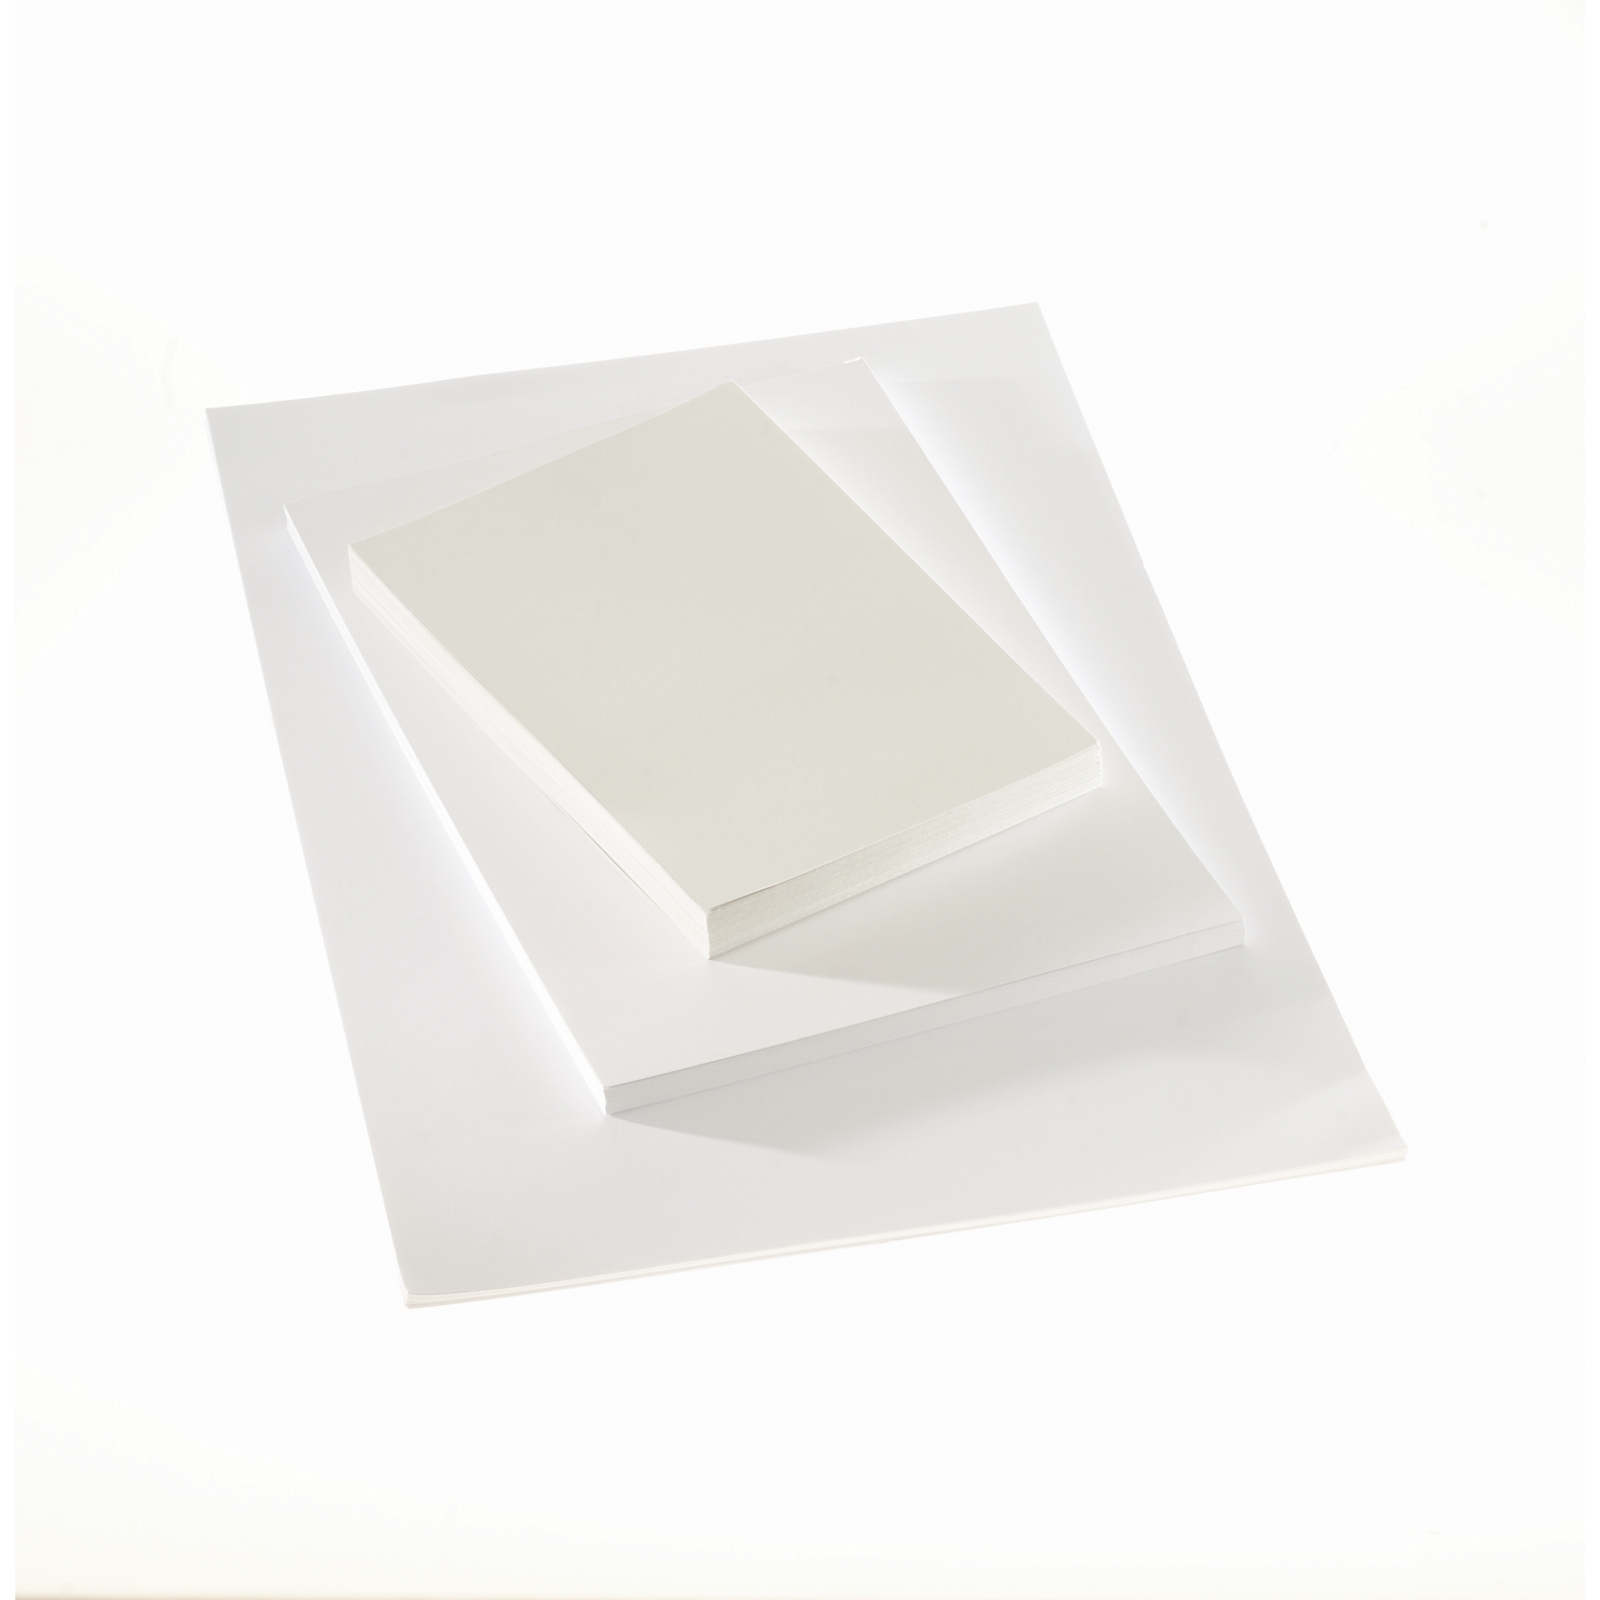 A4/297 x 210mm White Card - 200micron - Pack  of 100